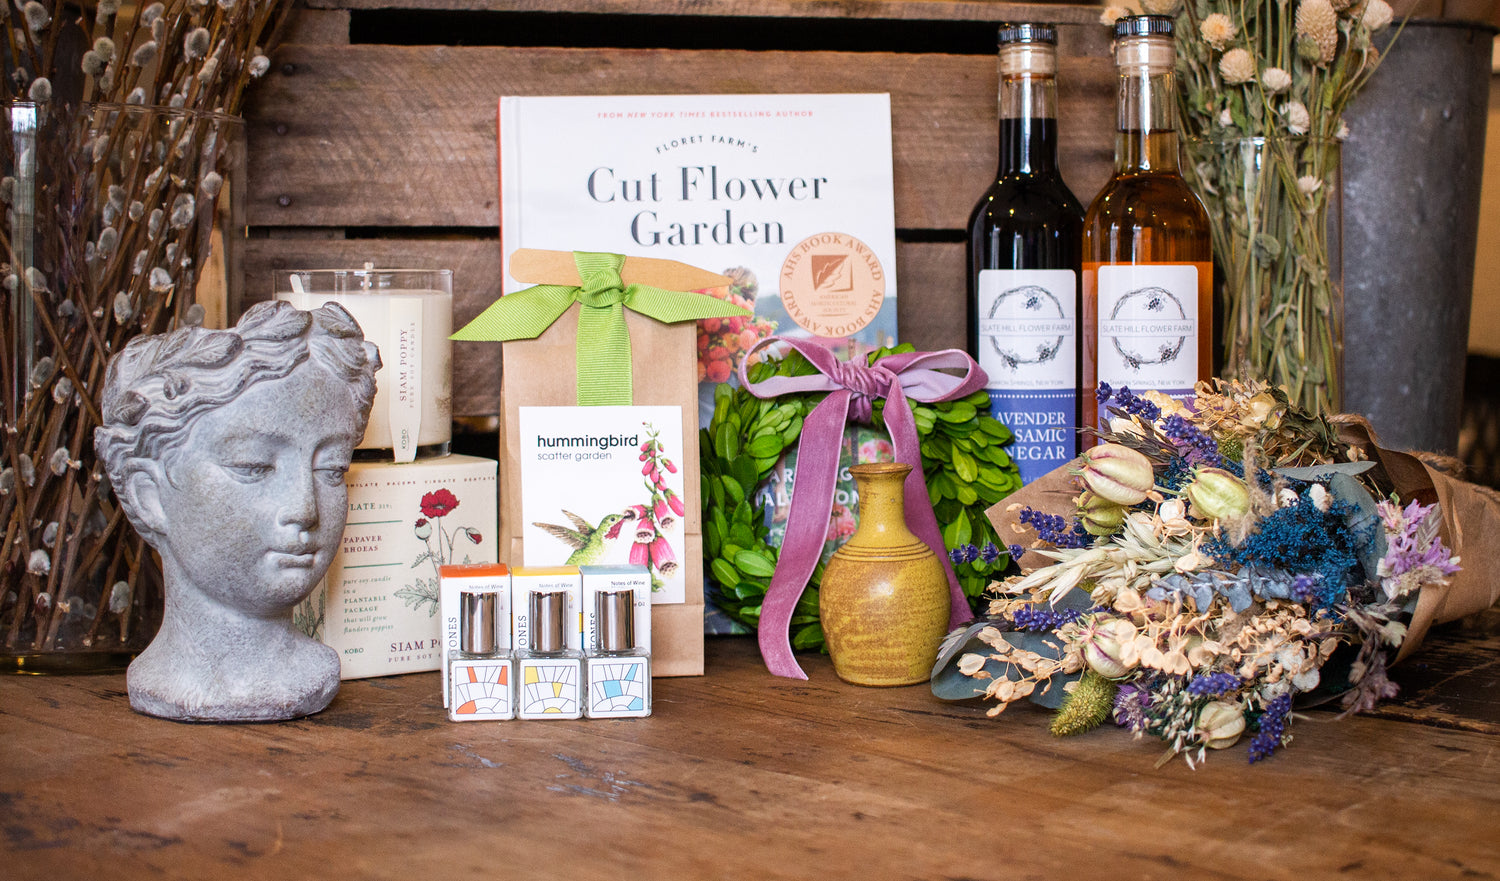 A display of various giftable items such as perfume, vases, seed packets, a dried flower bouquet, lavender balsamic vinegar, a "Cut Flower Garden" book, and candles.